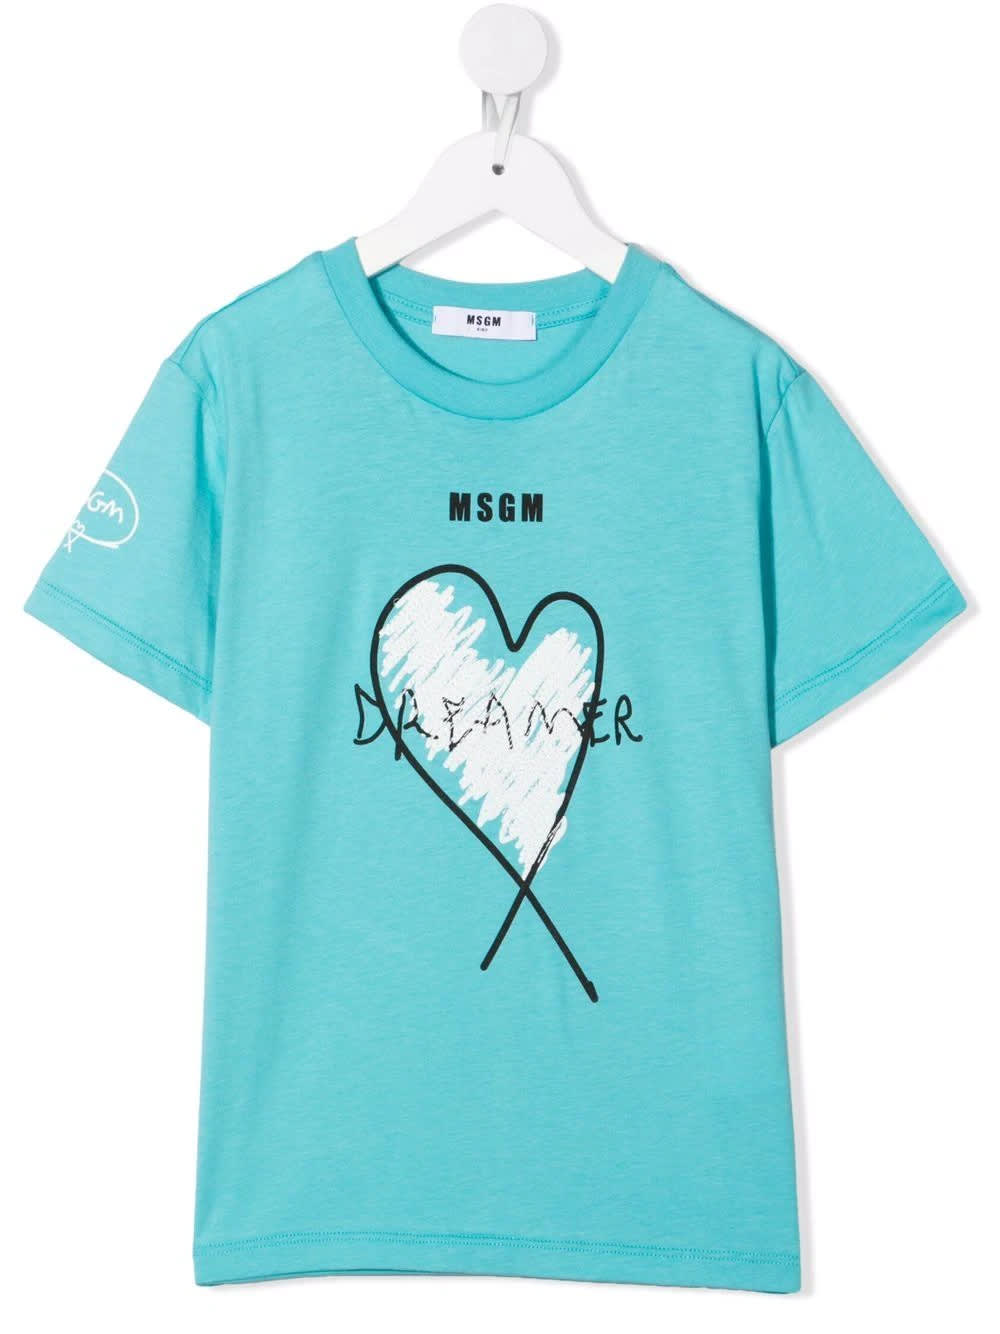 MSGM Kids Turquoise T-shirt With Logo And Dreamer Print